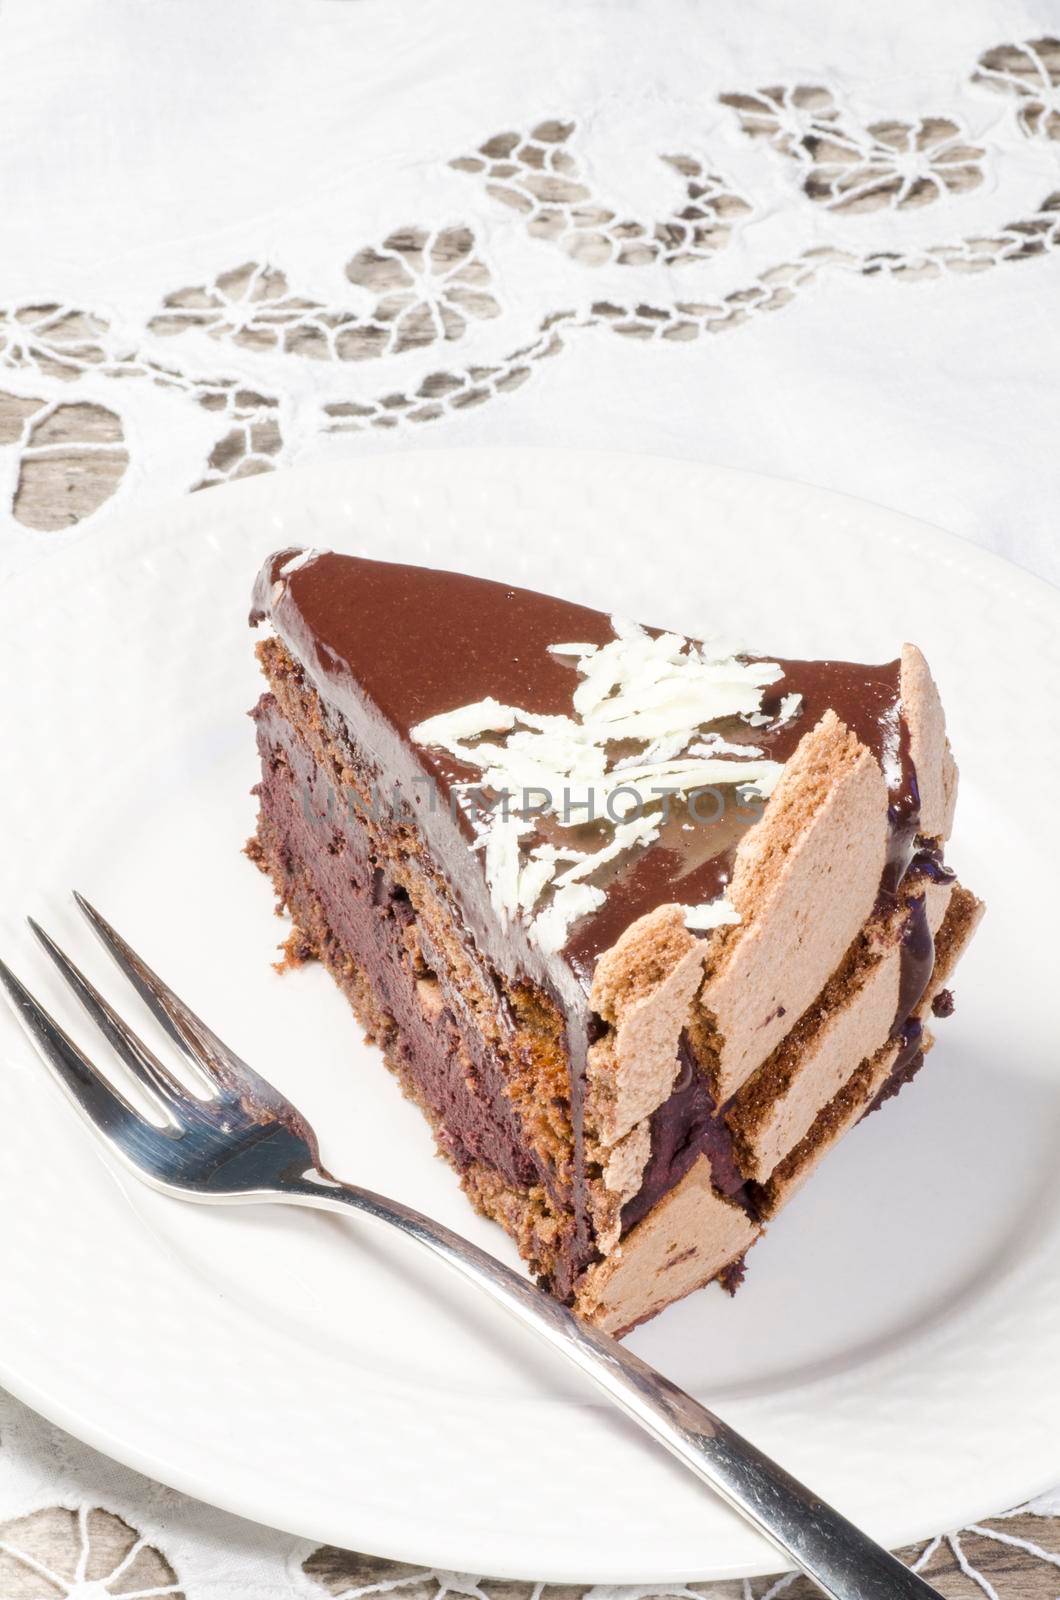 Slice of chocolate cake decorated with white chocolate flakes. From the series "French Desserts"